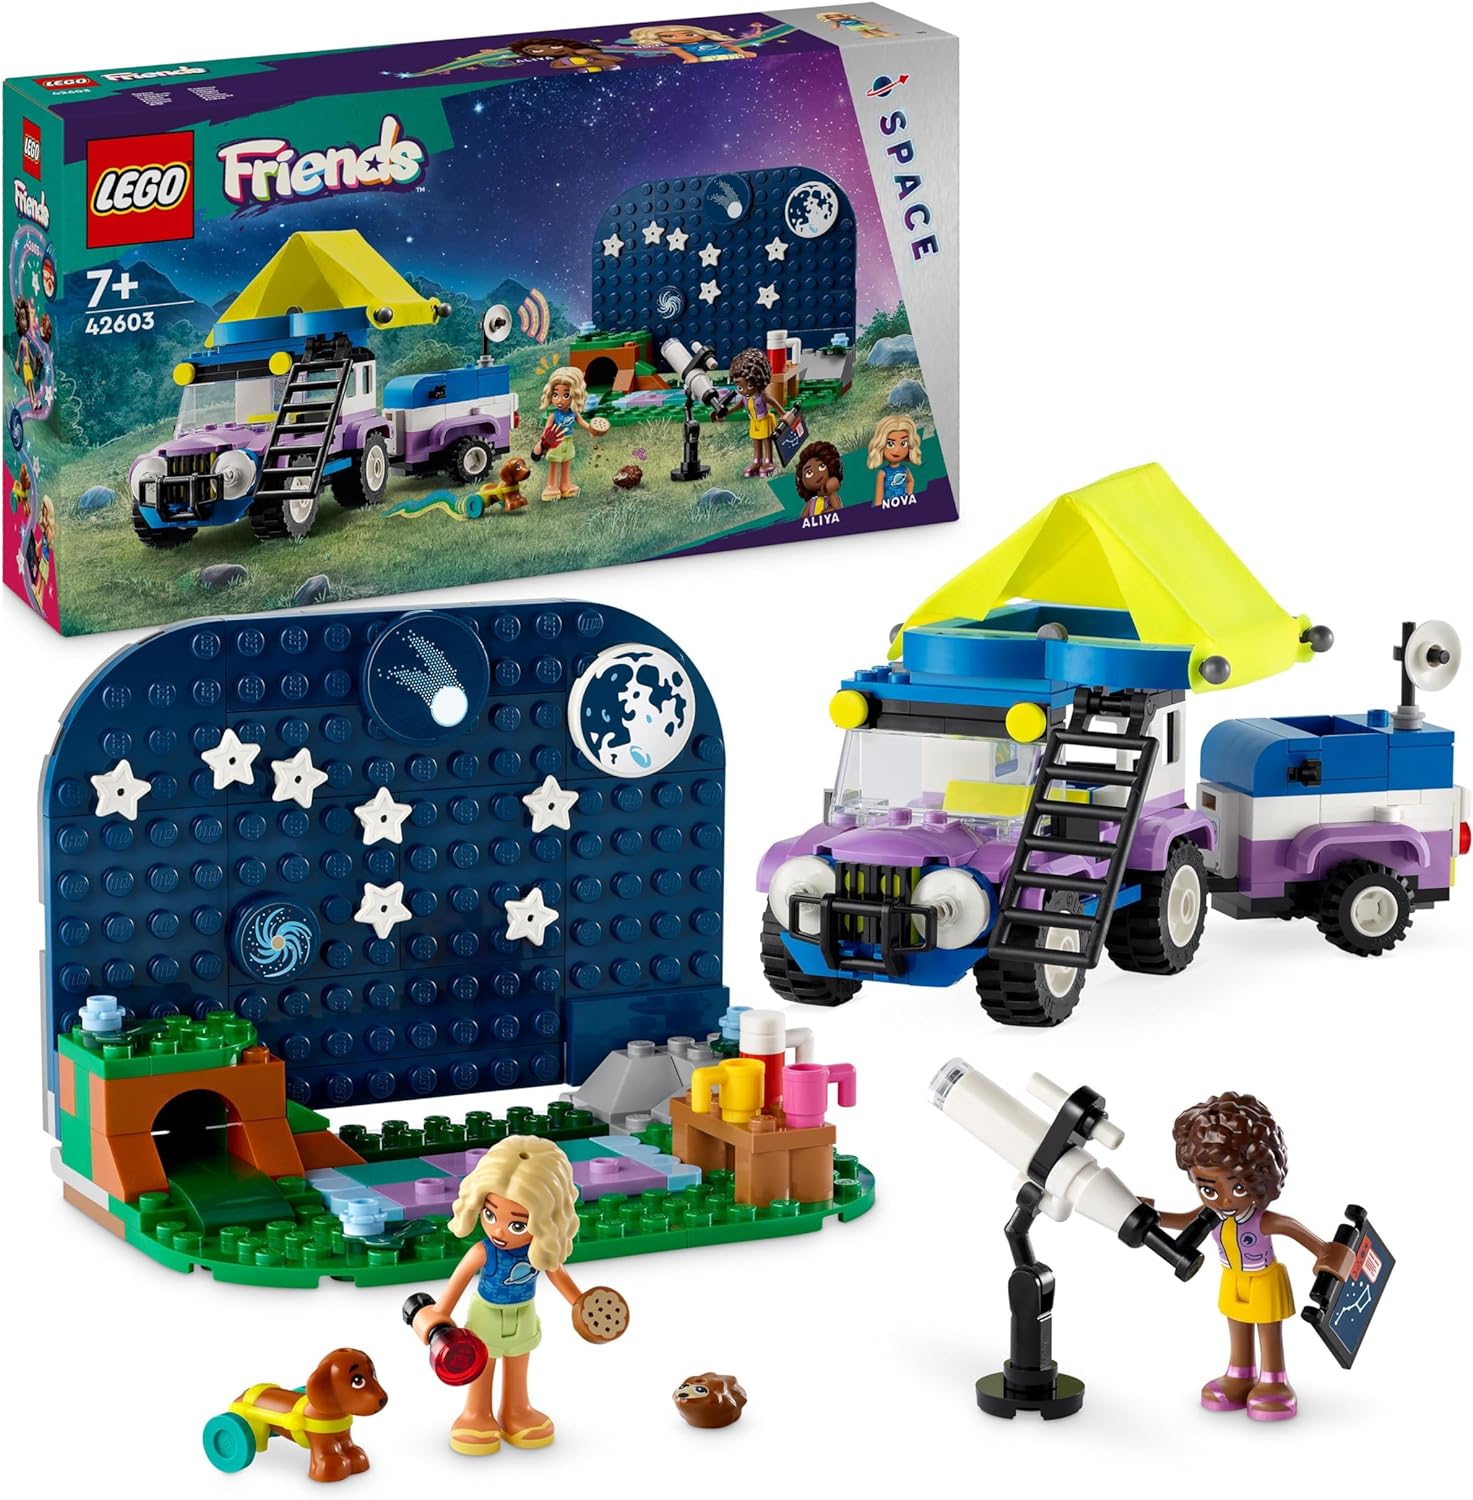 LEGO Friends Stargazer Camping Vehicle Set with Off-Road Vehicle Car and Toy Telescope, Gift from 7 Years for Girls and Boys, Includes the Toy Figures Nova, Aliya and a Dog 42603